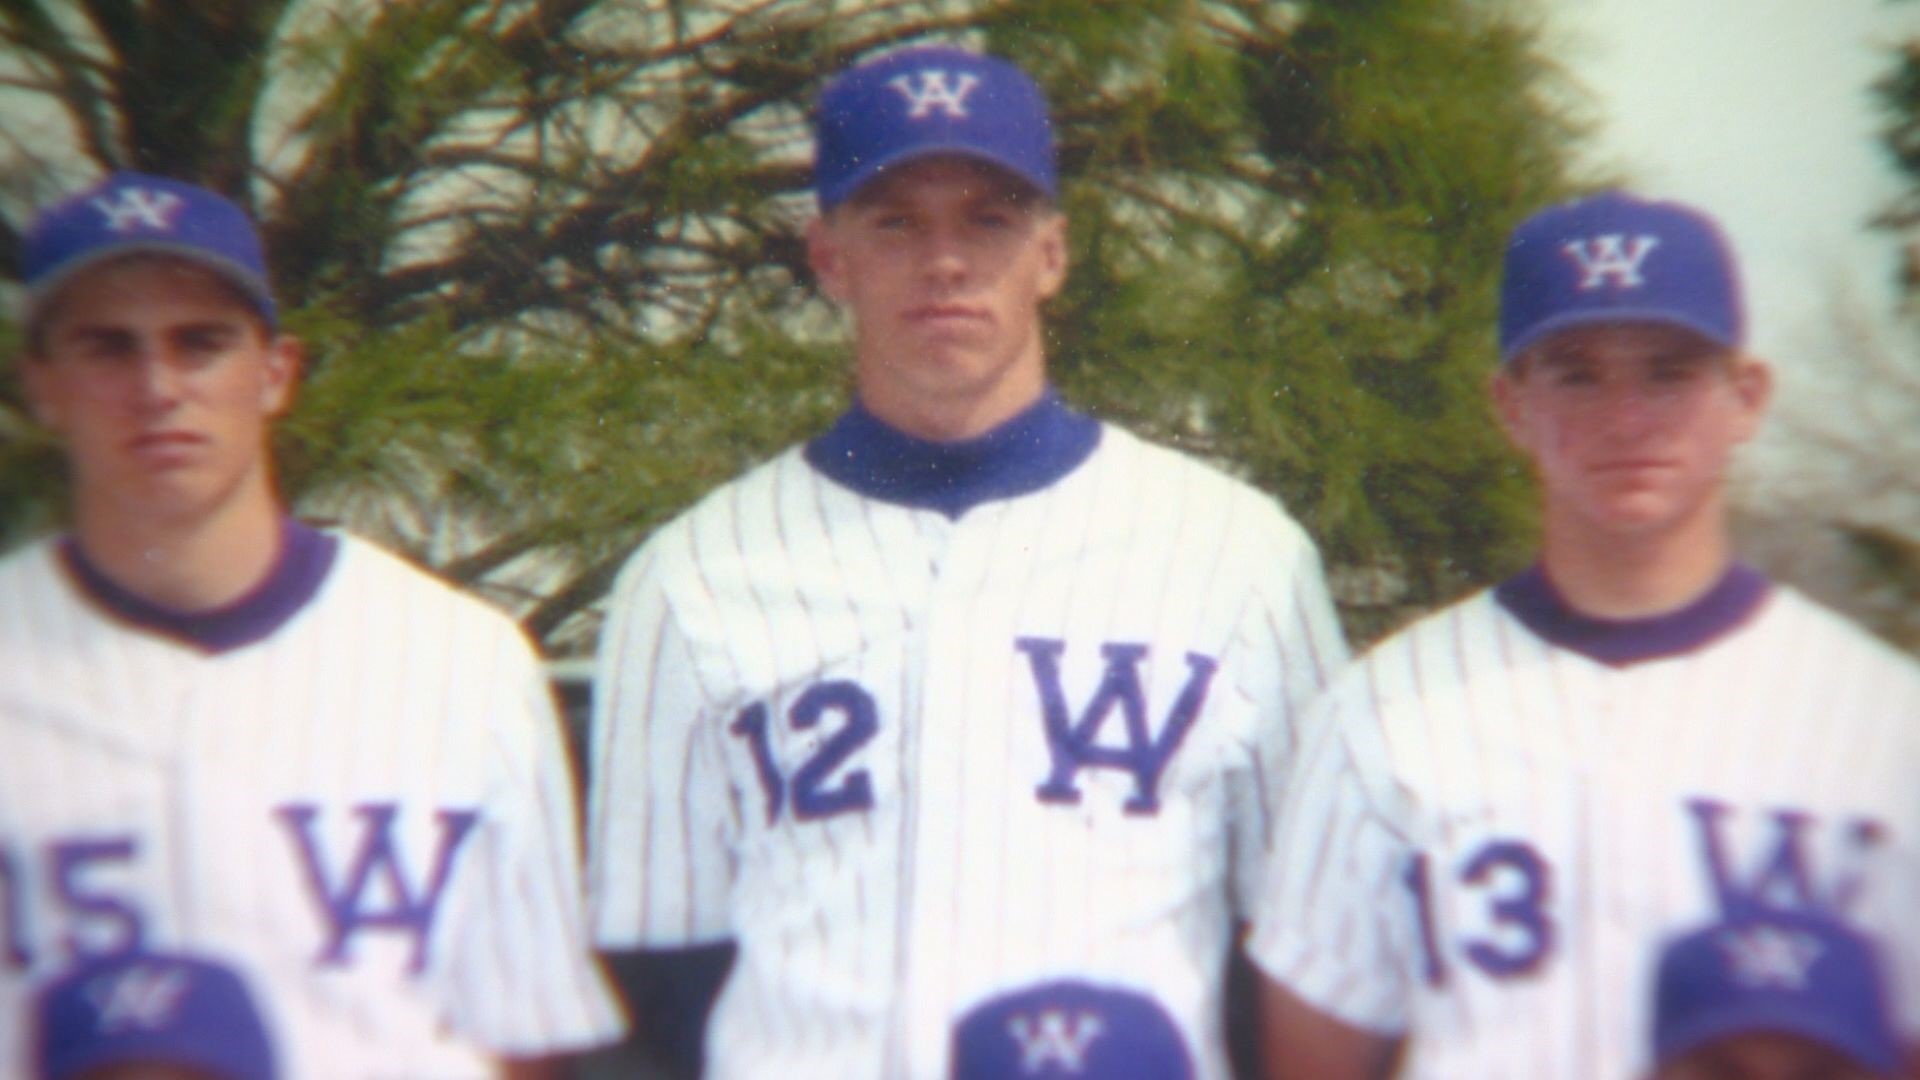 Colorado prep legend Roy Halladay was elected to the Baseball Hall of Fame on Tuesday